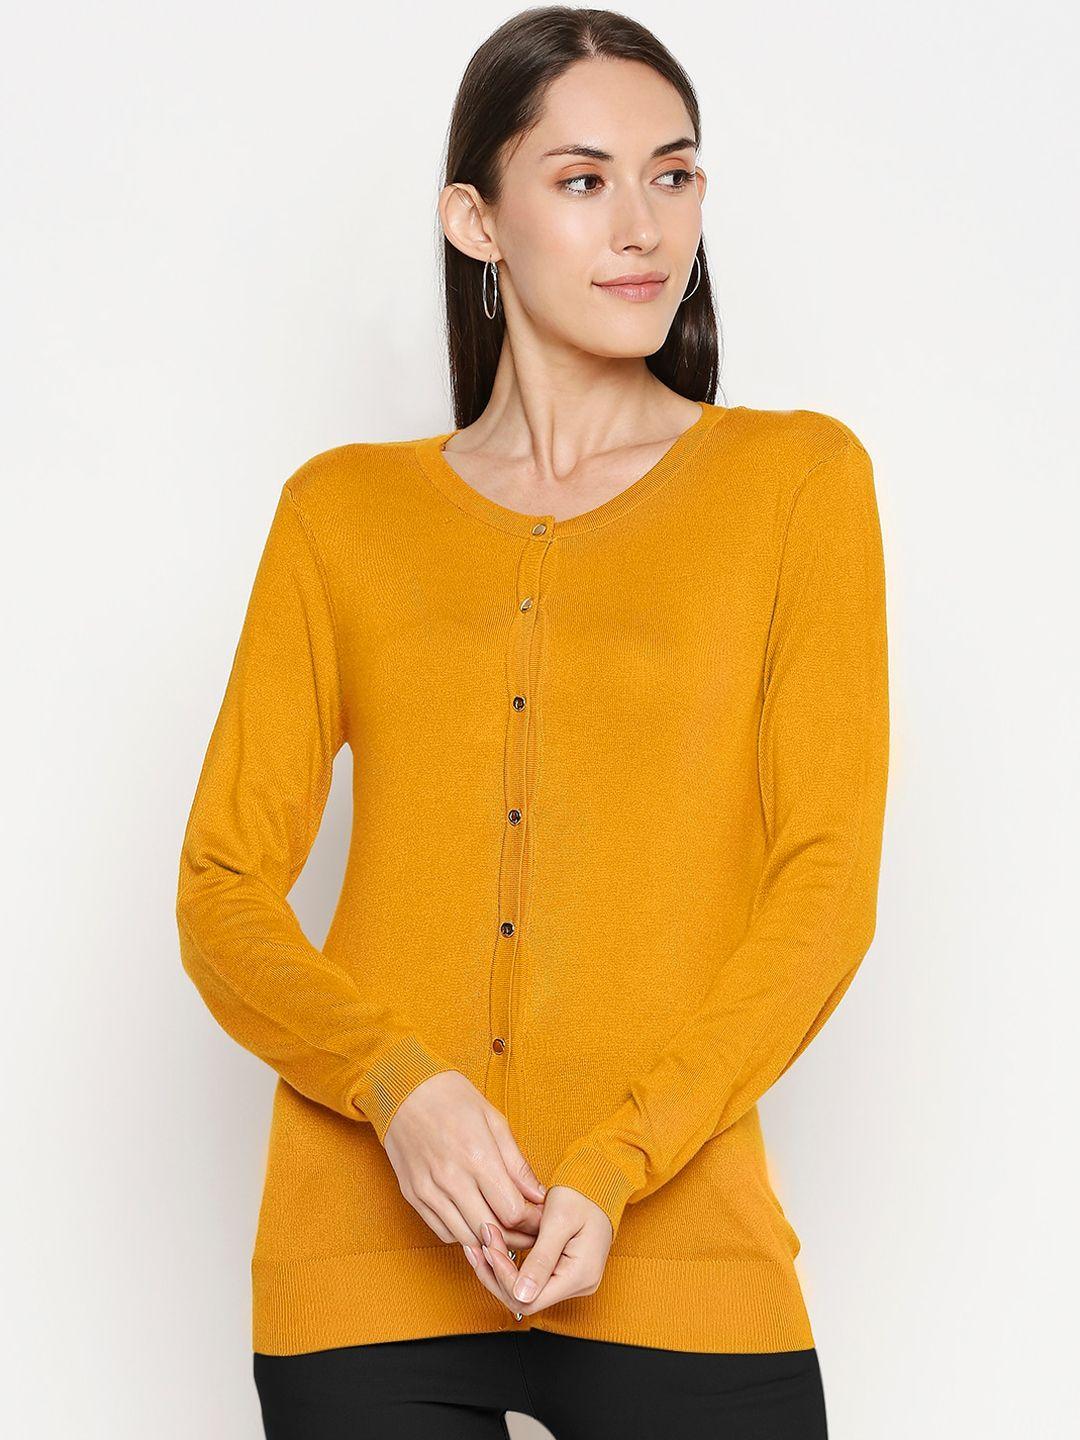 annabelle by pantaloons women mustard yellow solid cardigan